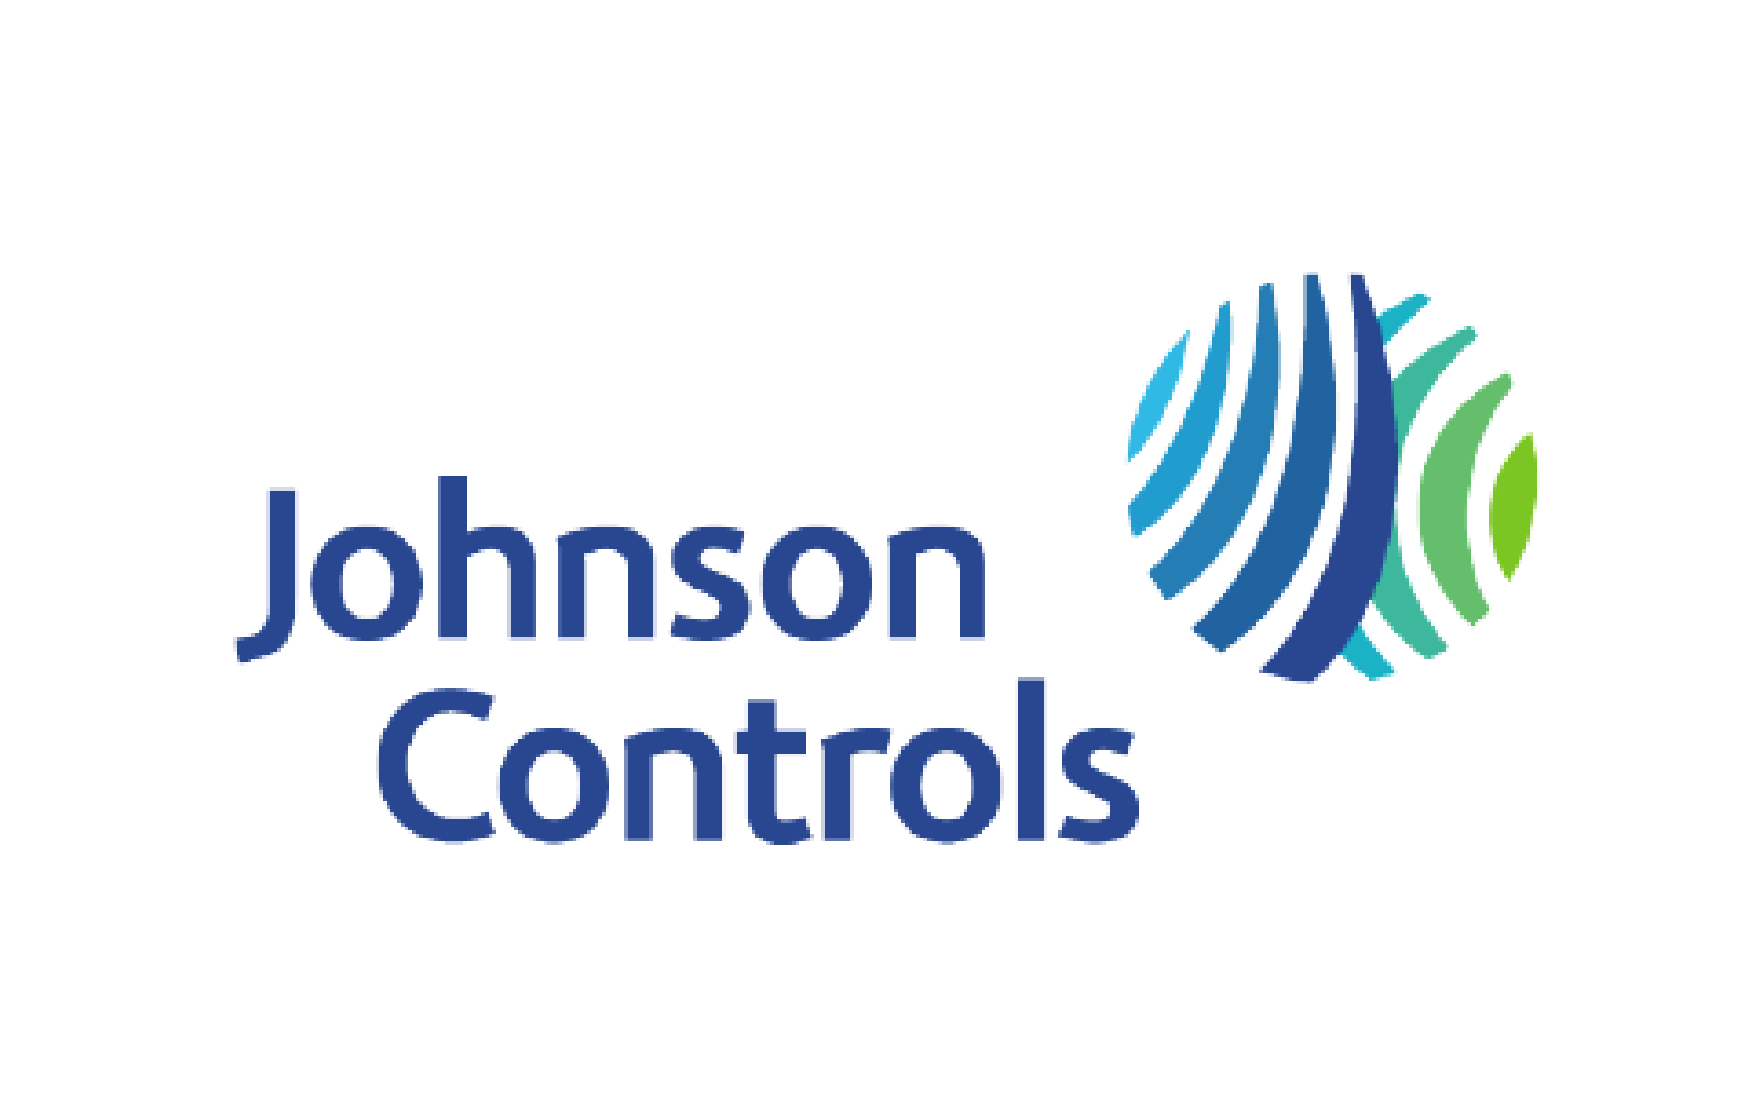 Logo of the company Johnson Controls who is a client of Precision Talent Solutions.